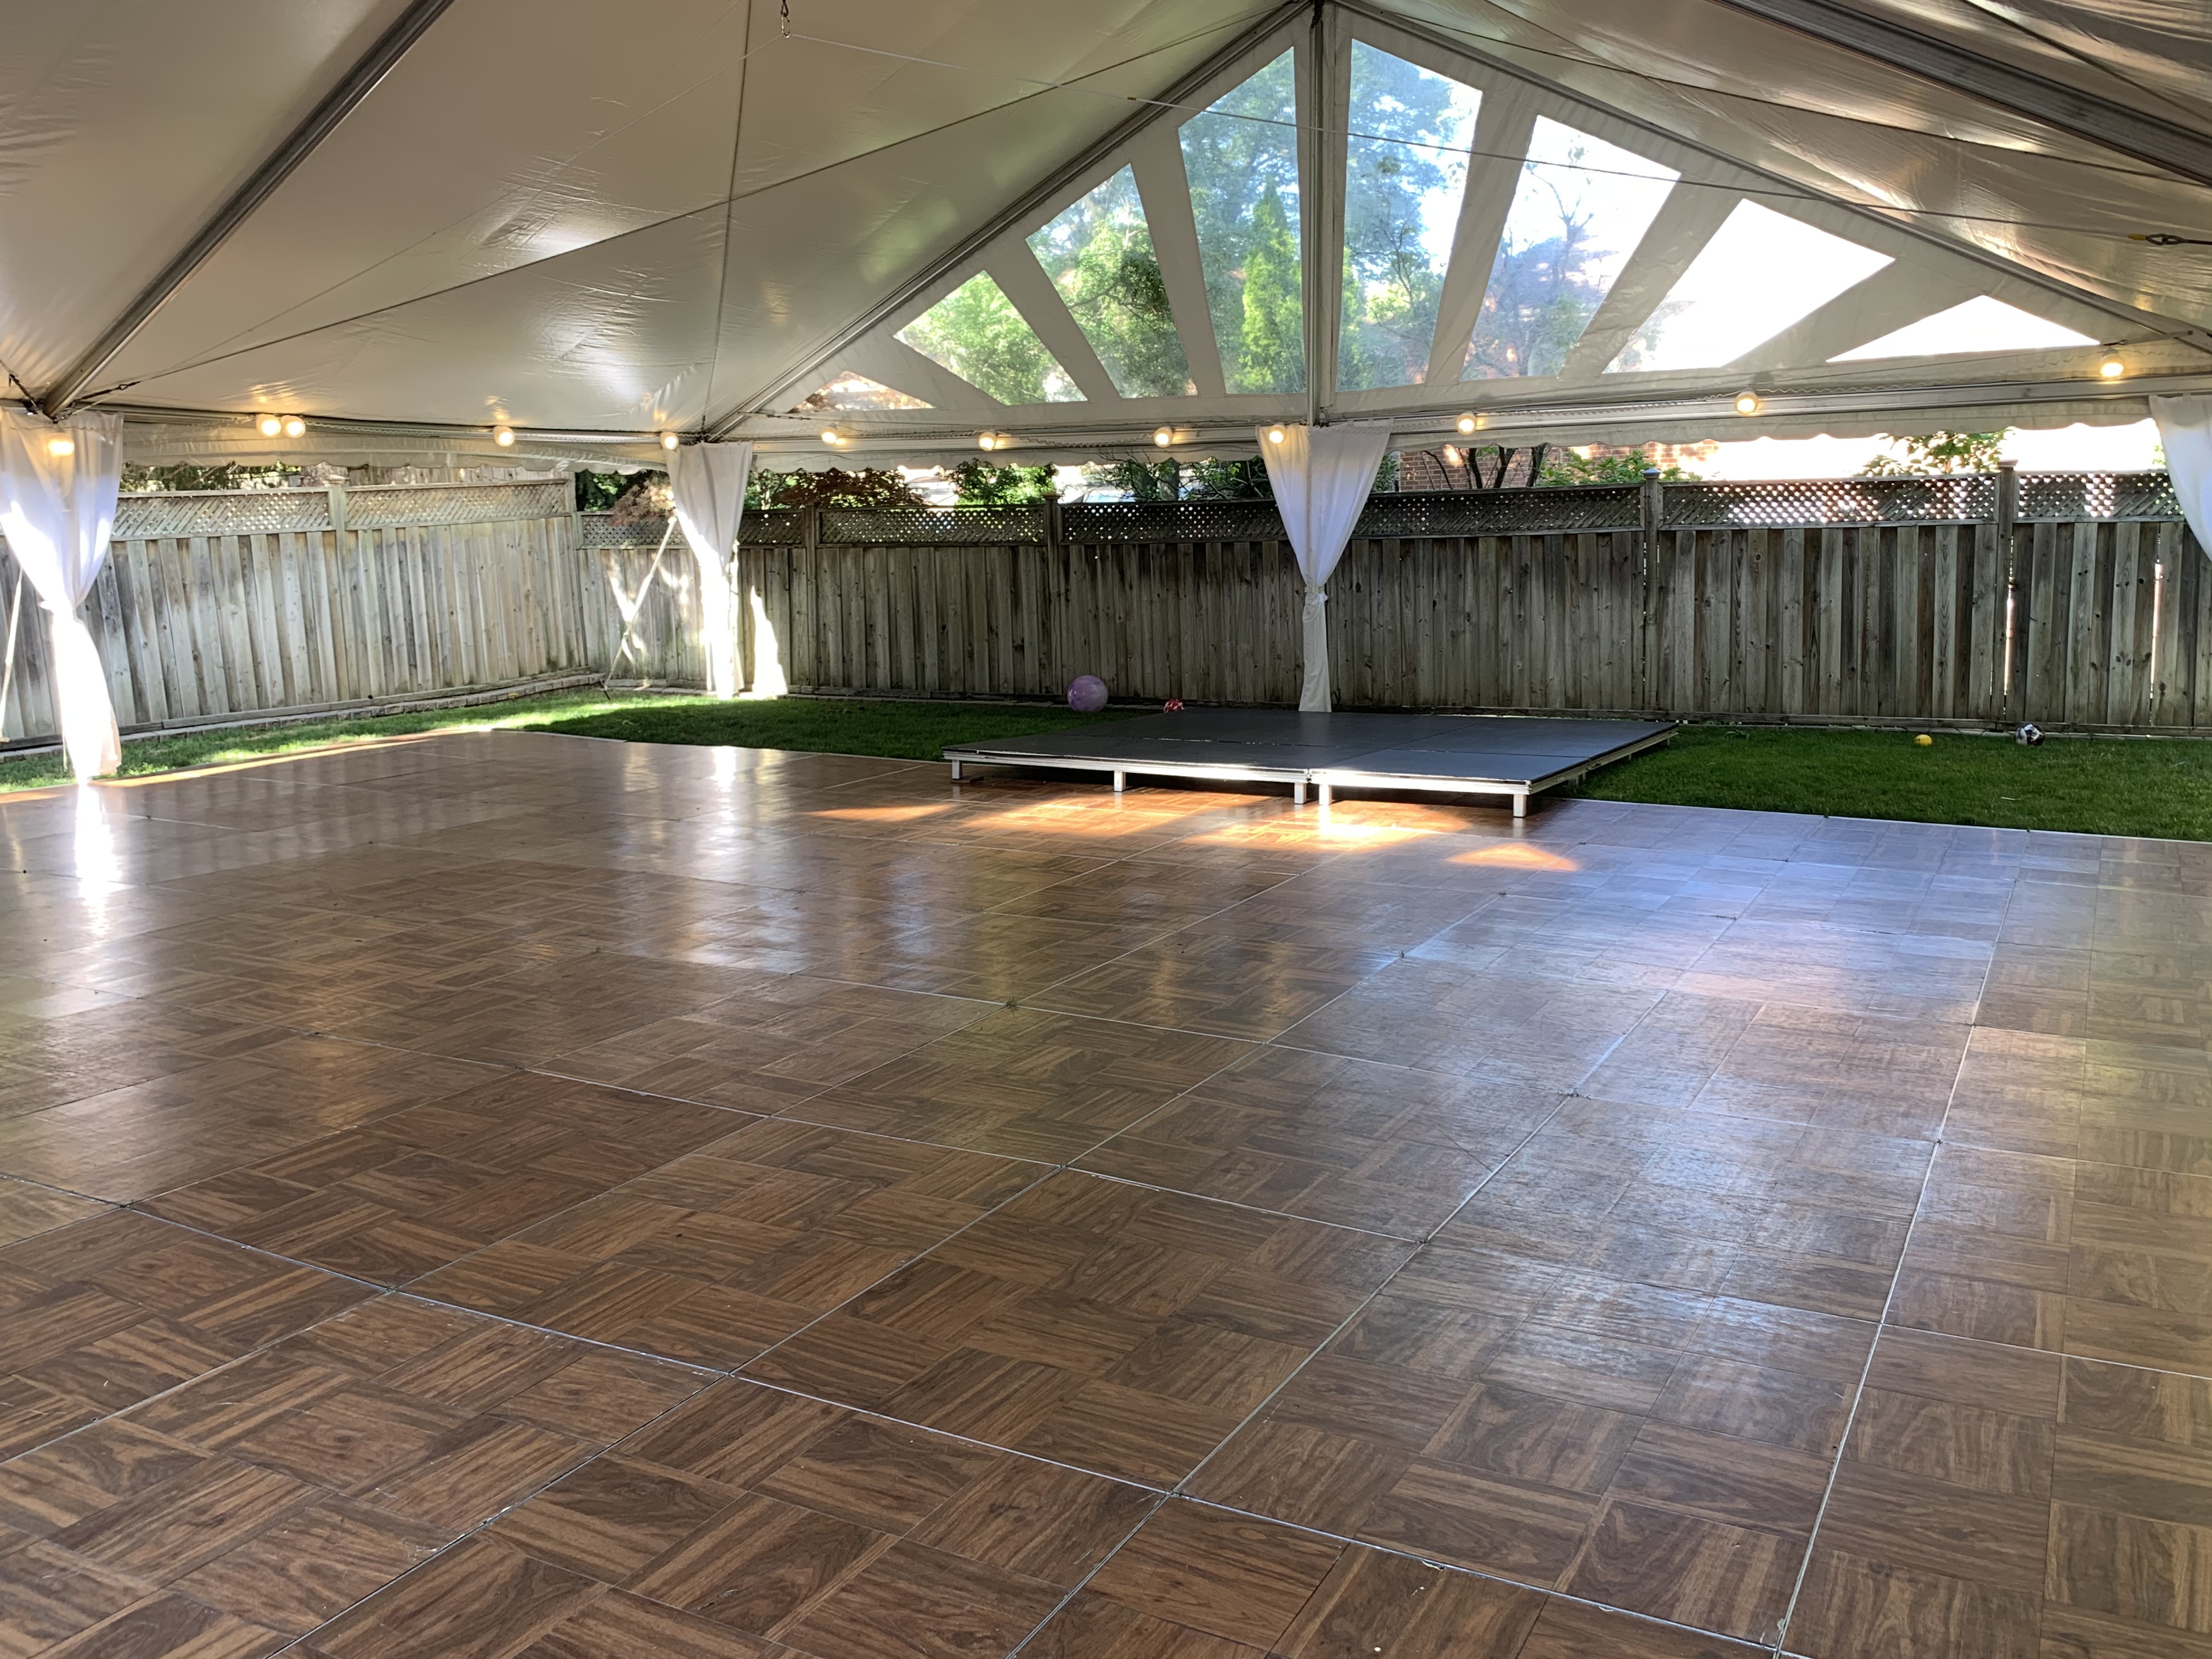 3'X4' PARQUET OUTDOOR DANCE FLOOR (12x12=12 pcs, 15x16= 20 pcs, 20x21= 35 pcs) Must be covered by tent or overhead structure 